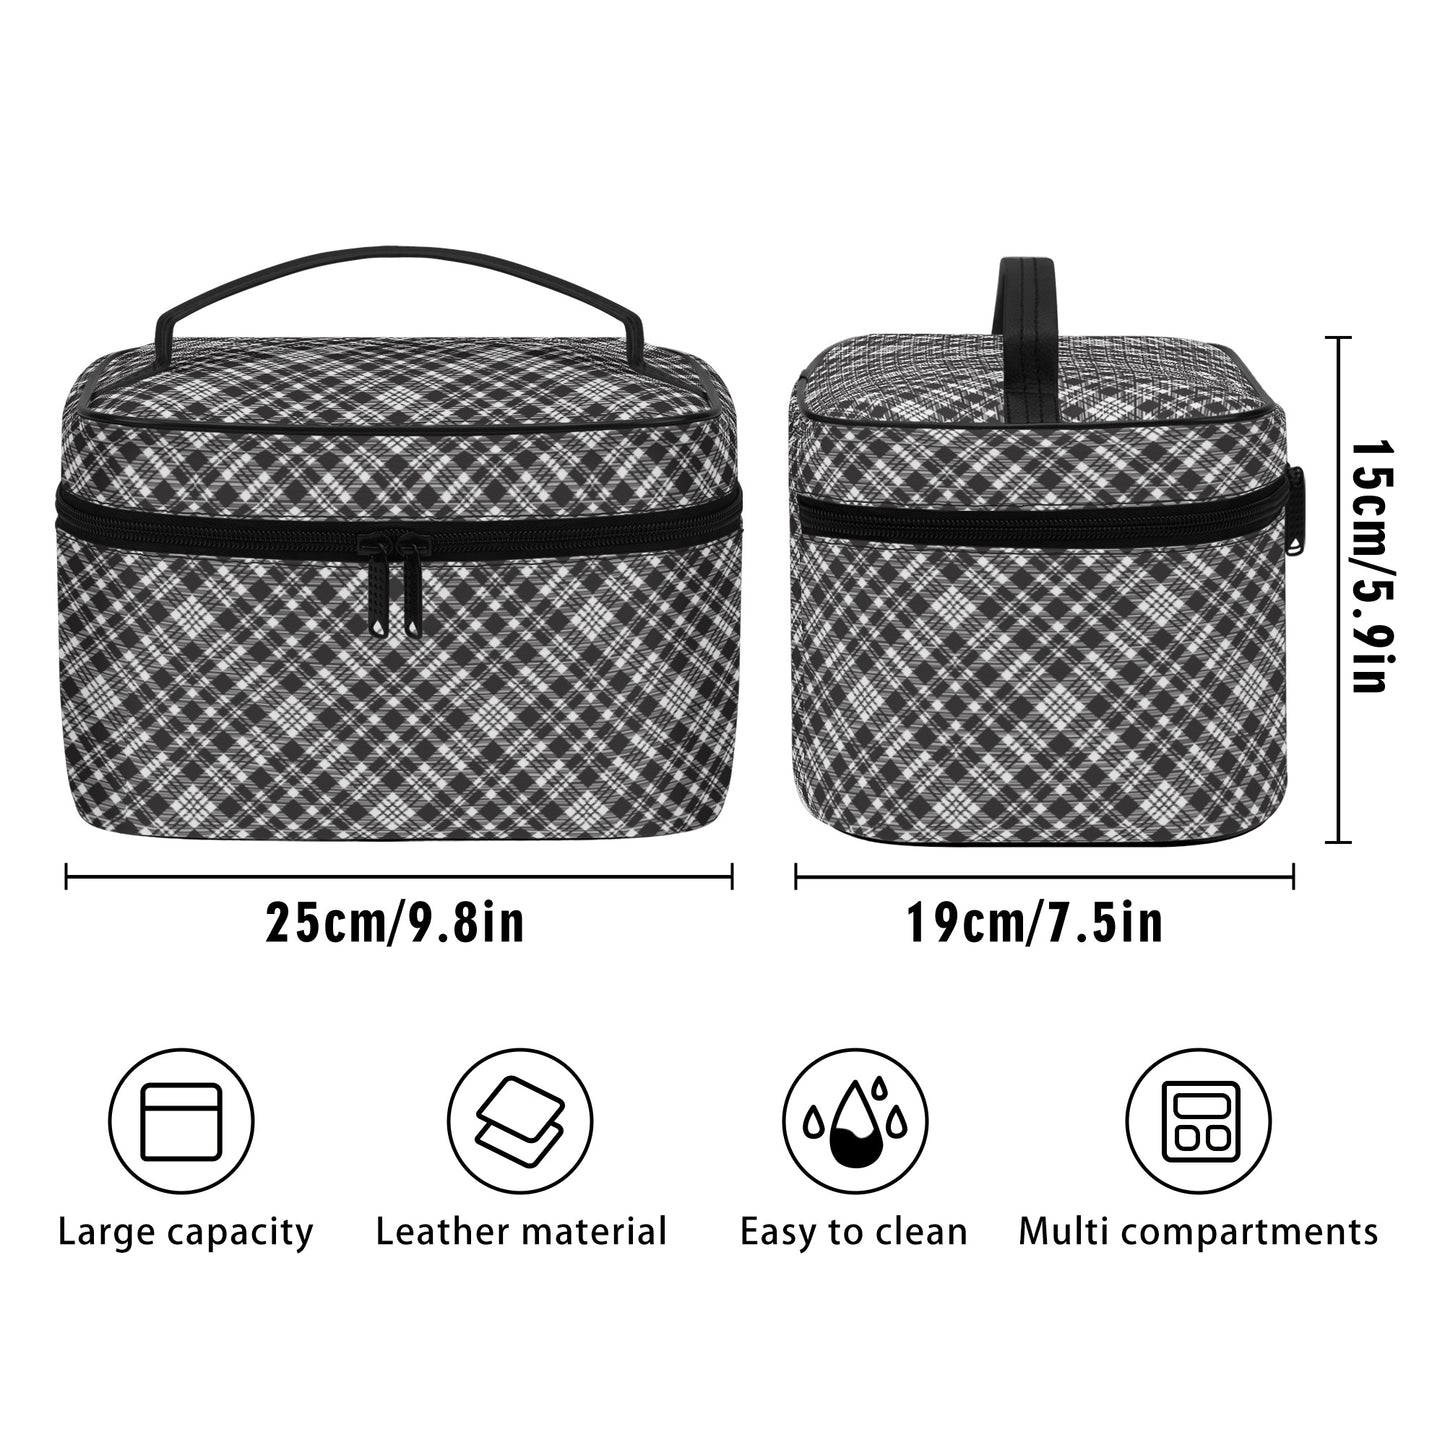 Chic Contrasting Black & Grey Argyle Plaid Pattern  - Cosmetic or Toiletry Bag Faux Leather (PU)